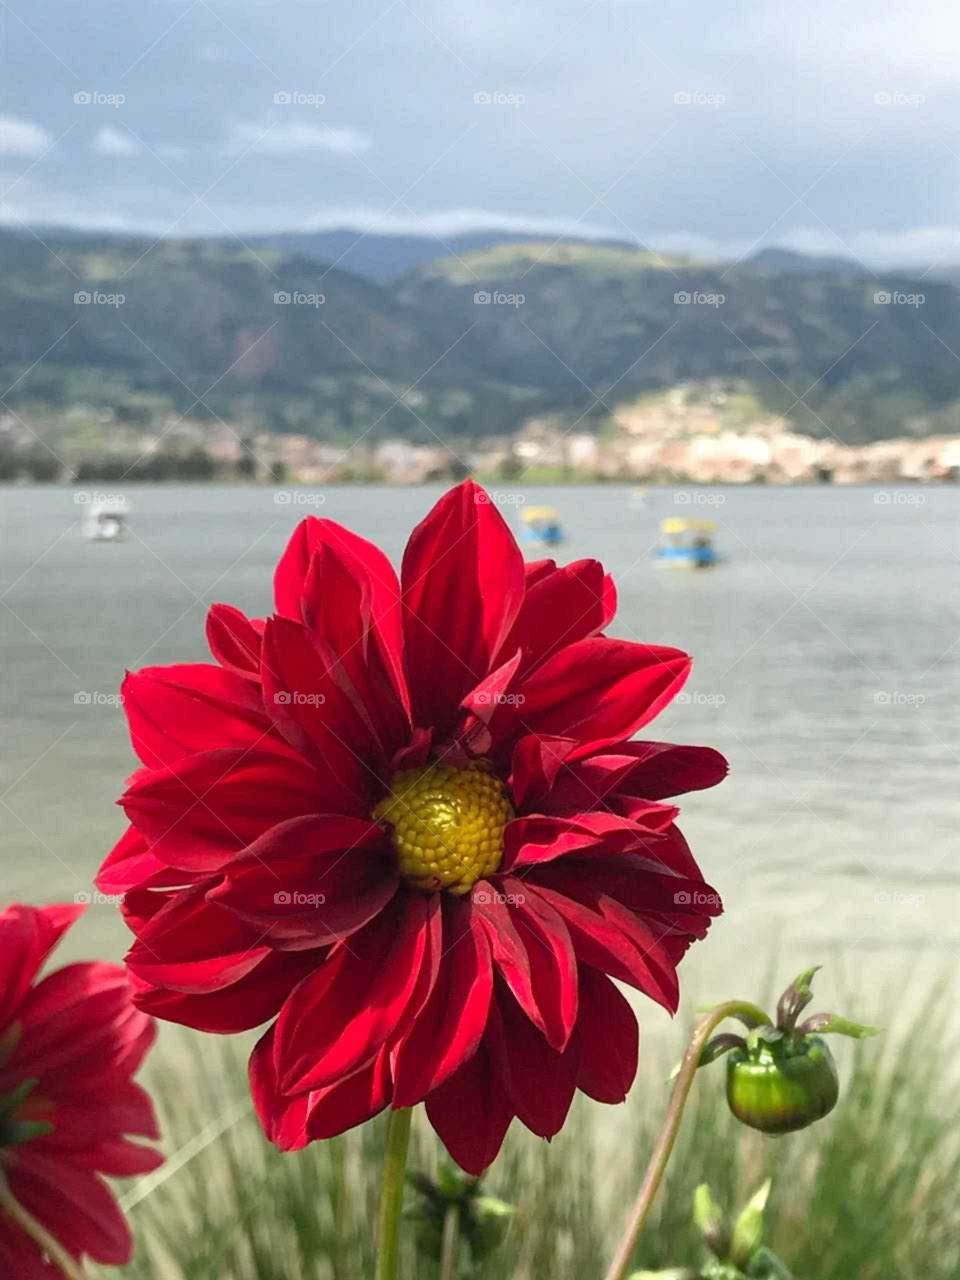 flower  red in the lagoon.